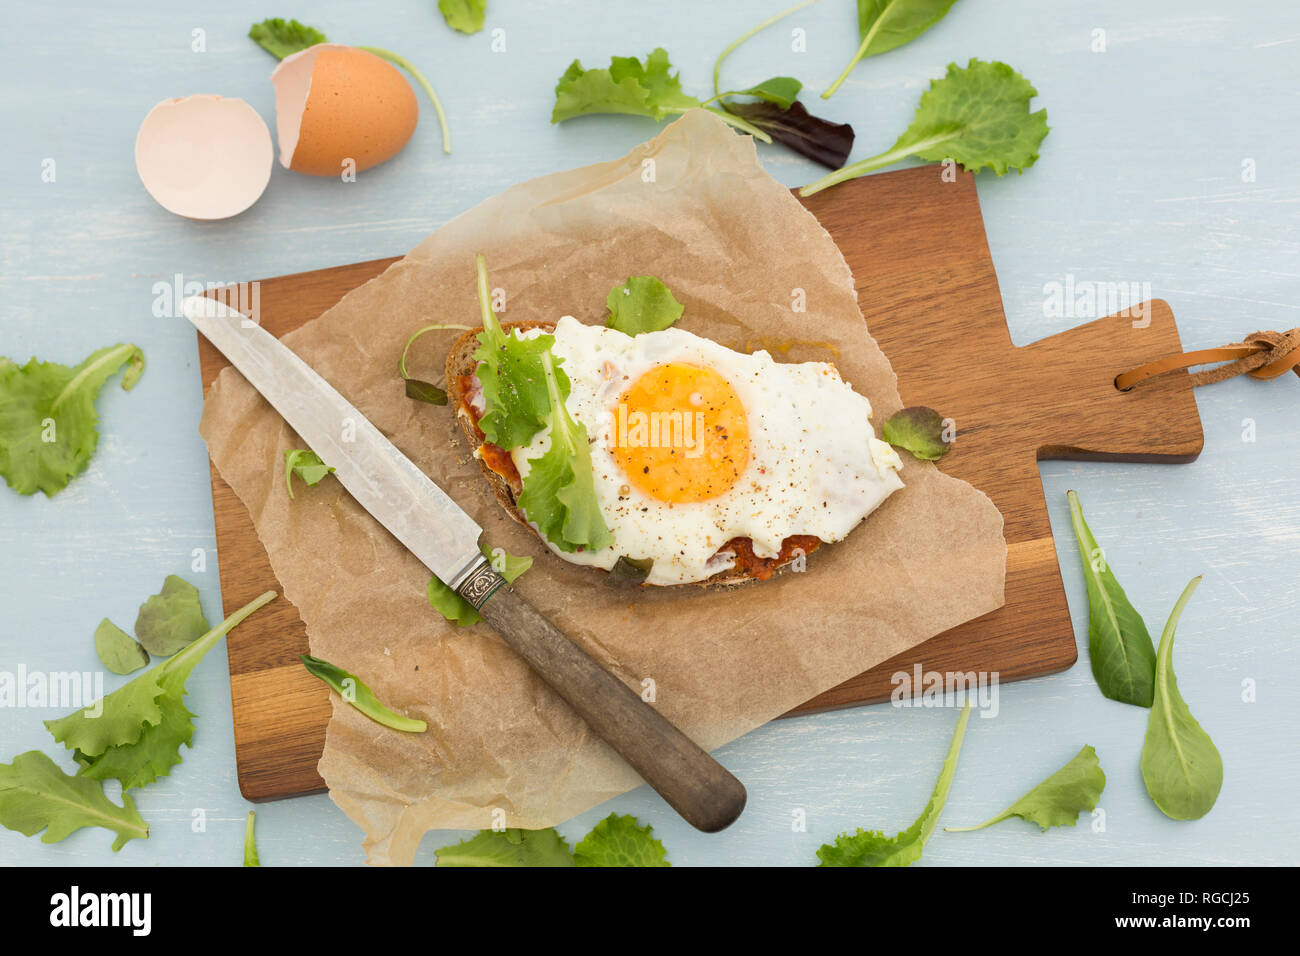 Fried egg on slice of brown bread coated with paprika cream on baking paper Stock Photo